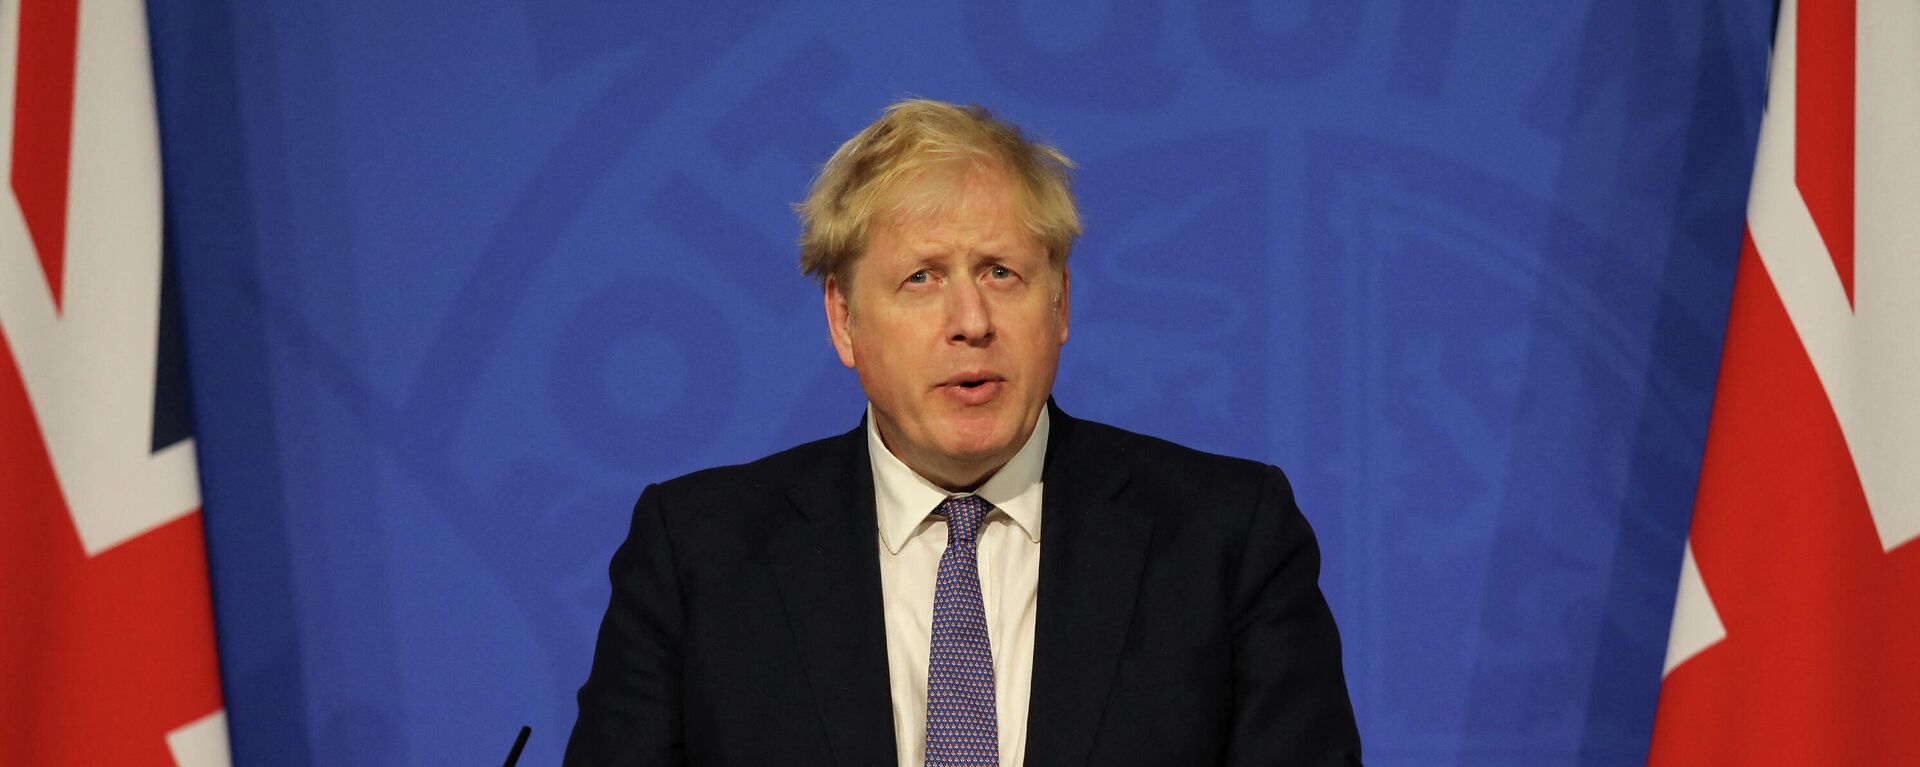 Britain's Prime Minister Boris Johnson speaks during a virtual press conference to update the nation on the status of the Covid-19 pandemic, in the Downing Street briefing room in central London on January 4, 2022. - Sputnik International, 1920, 04.01.2022